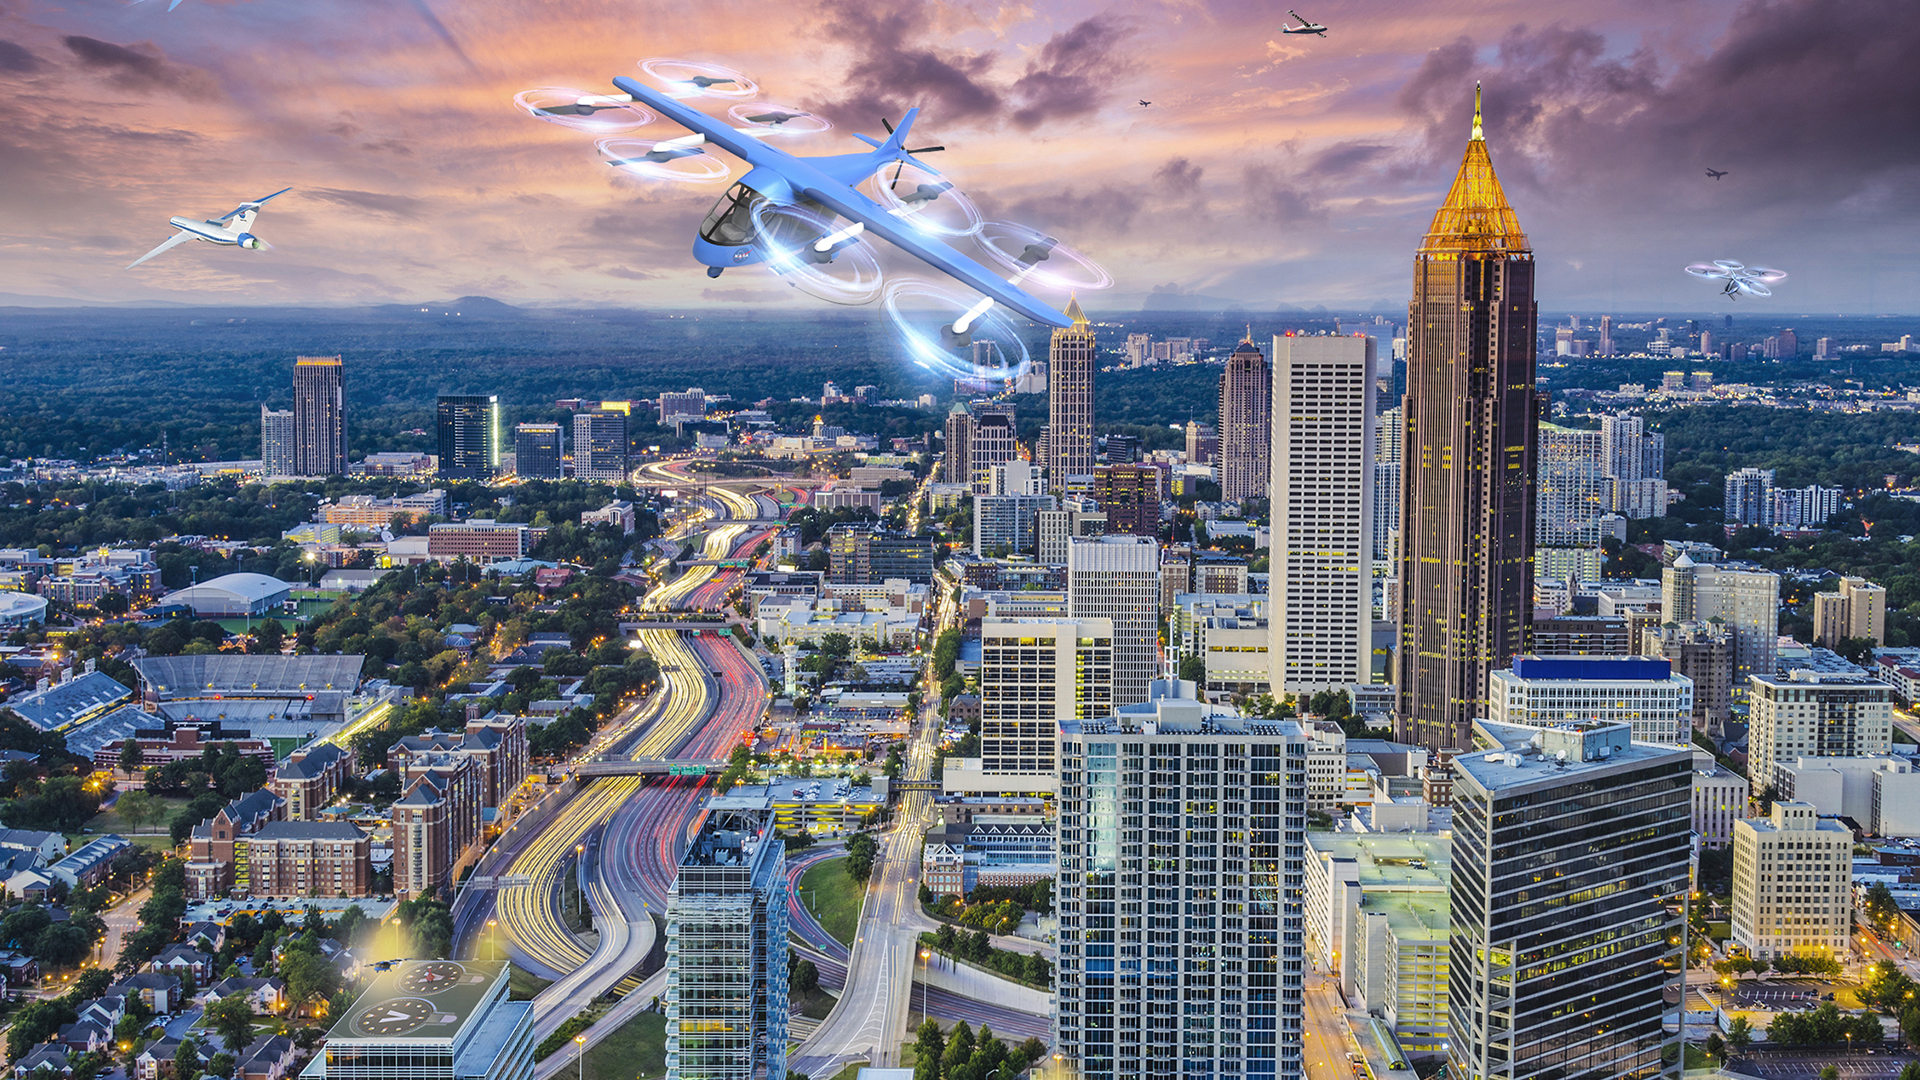 Artist concept of urban air mobility vehicles in flight over a city.